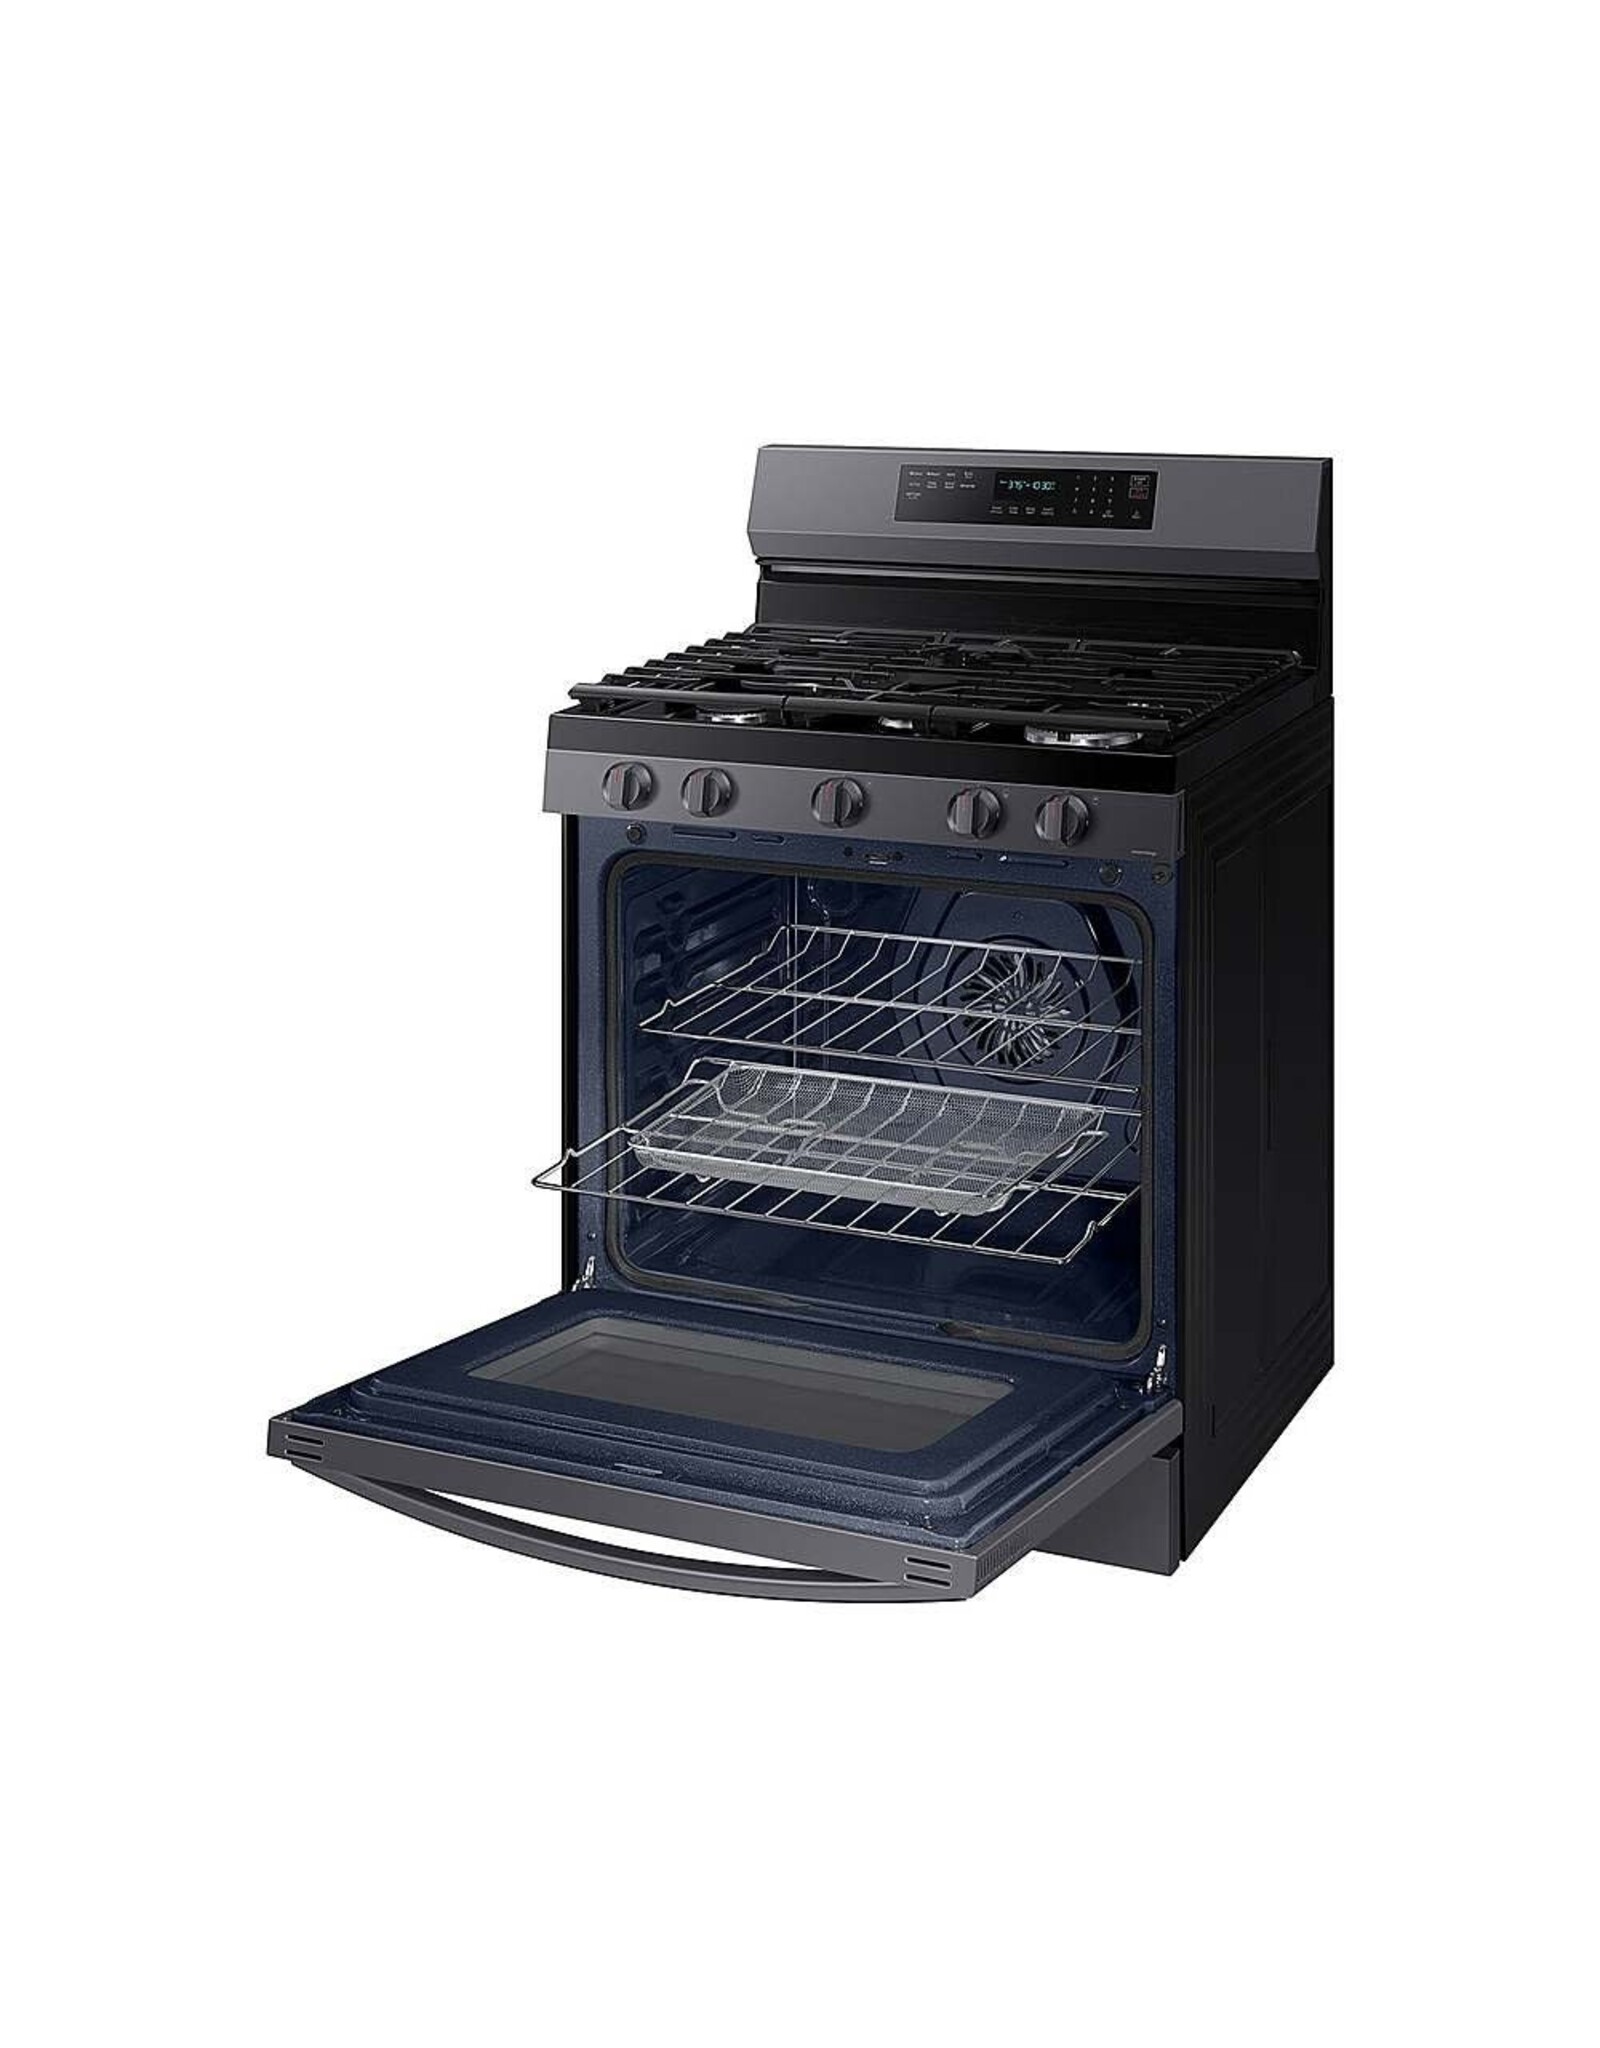 SAMSUNG NX60A671SG 6.3 cu. ft. Smart Freestanding Electric Range with No-Preheat Air Fry, Convection+ & Griddle in Black Stainless Steel